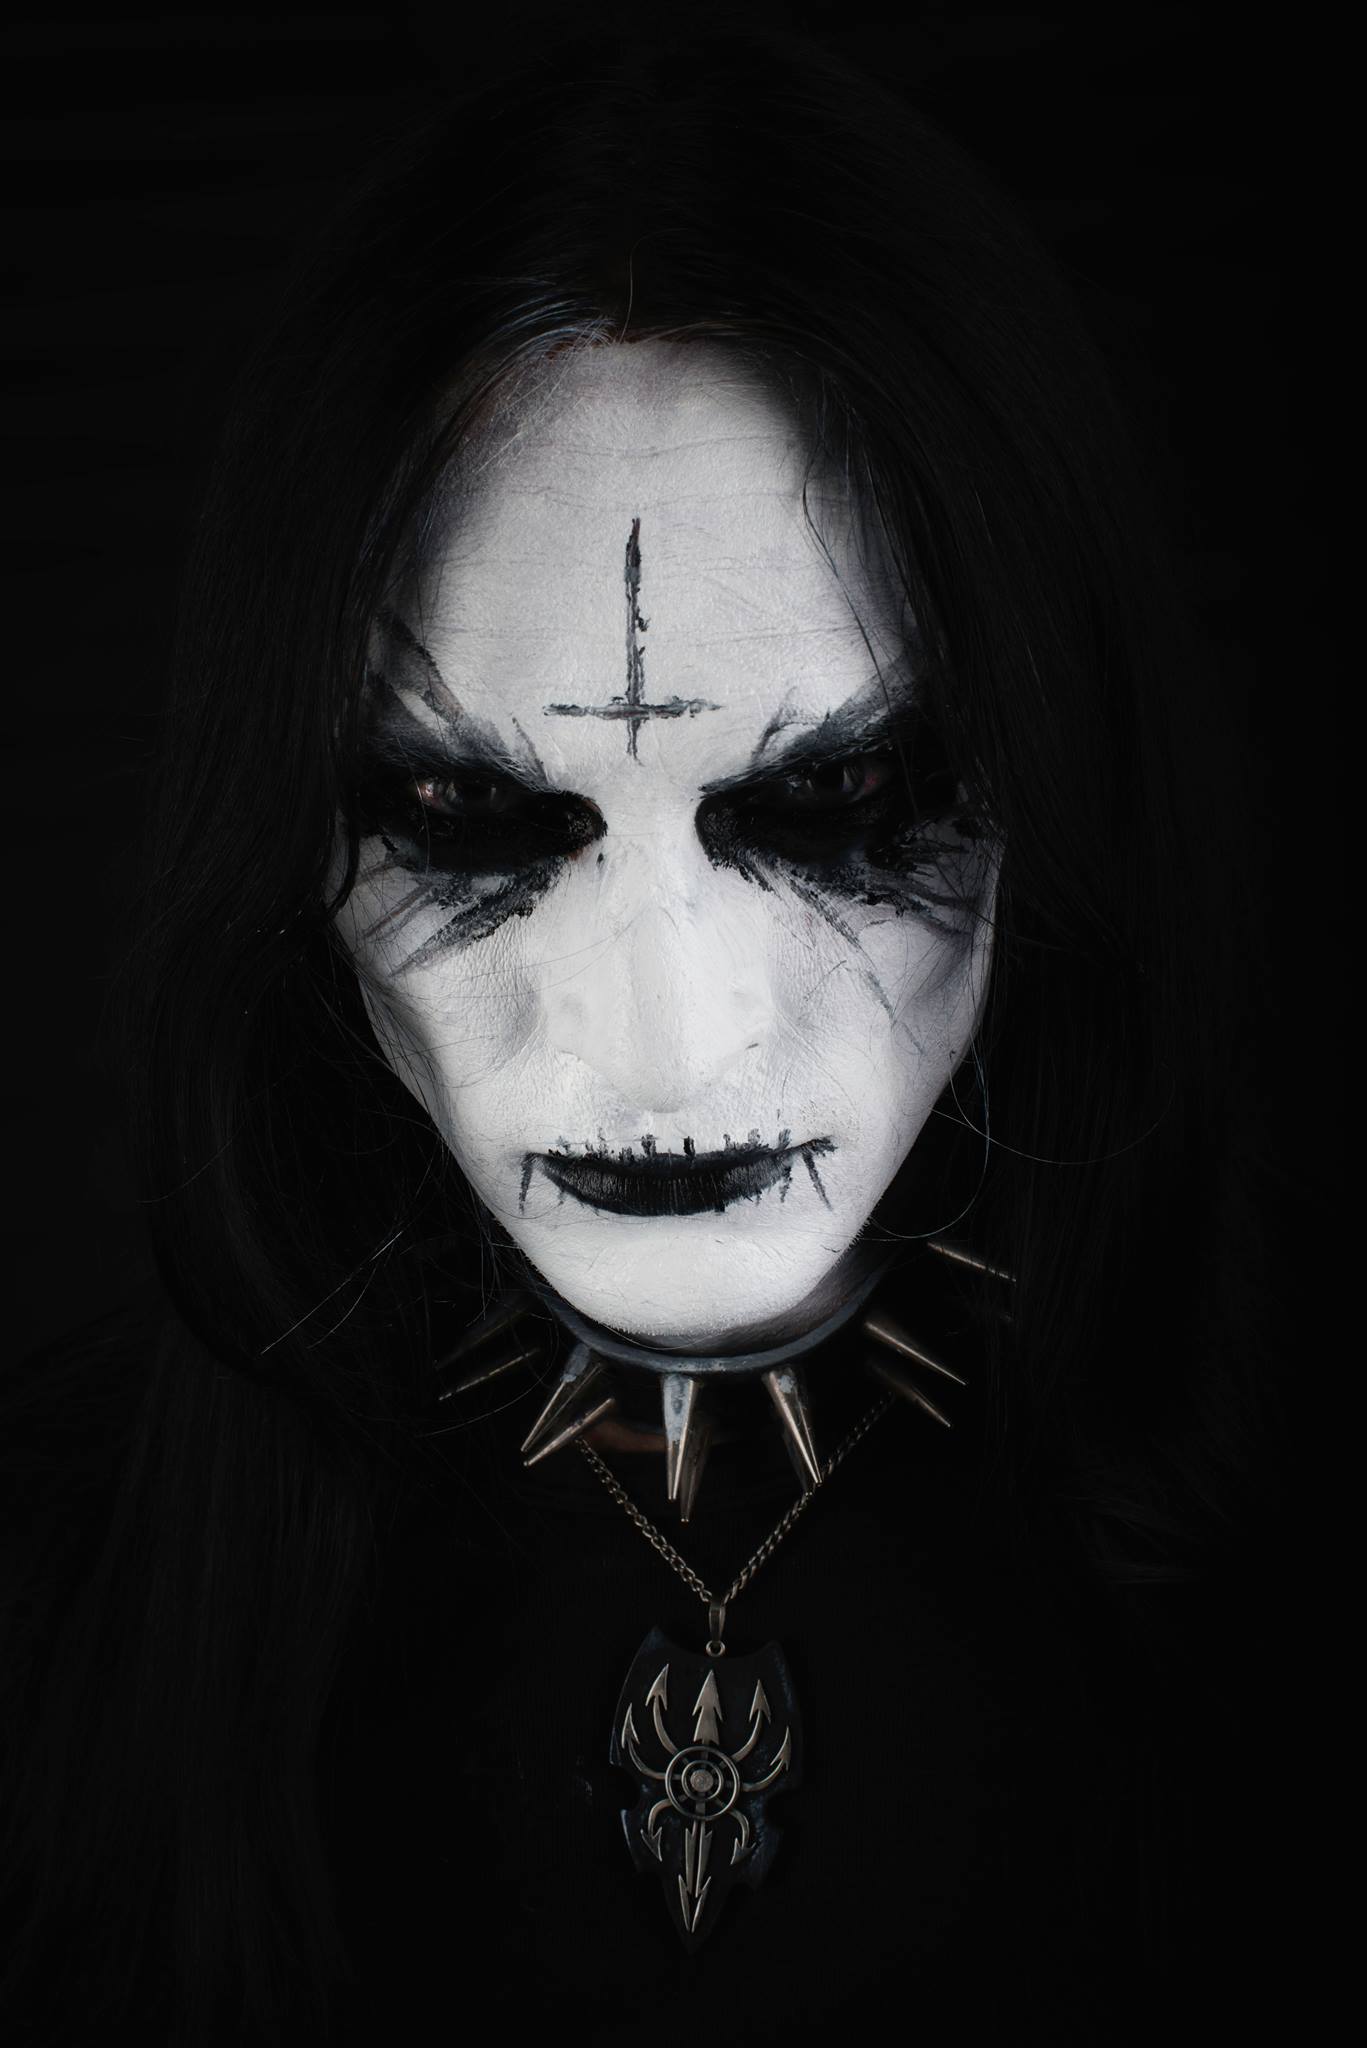 Bassist King Ov Hell quits Abbath over new album’s “lyrical concepts”